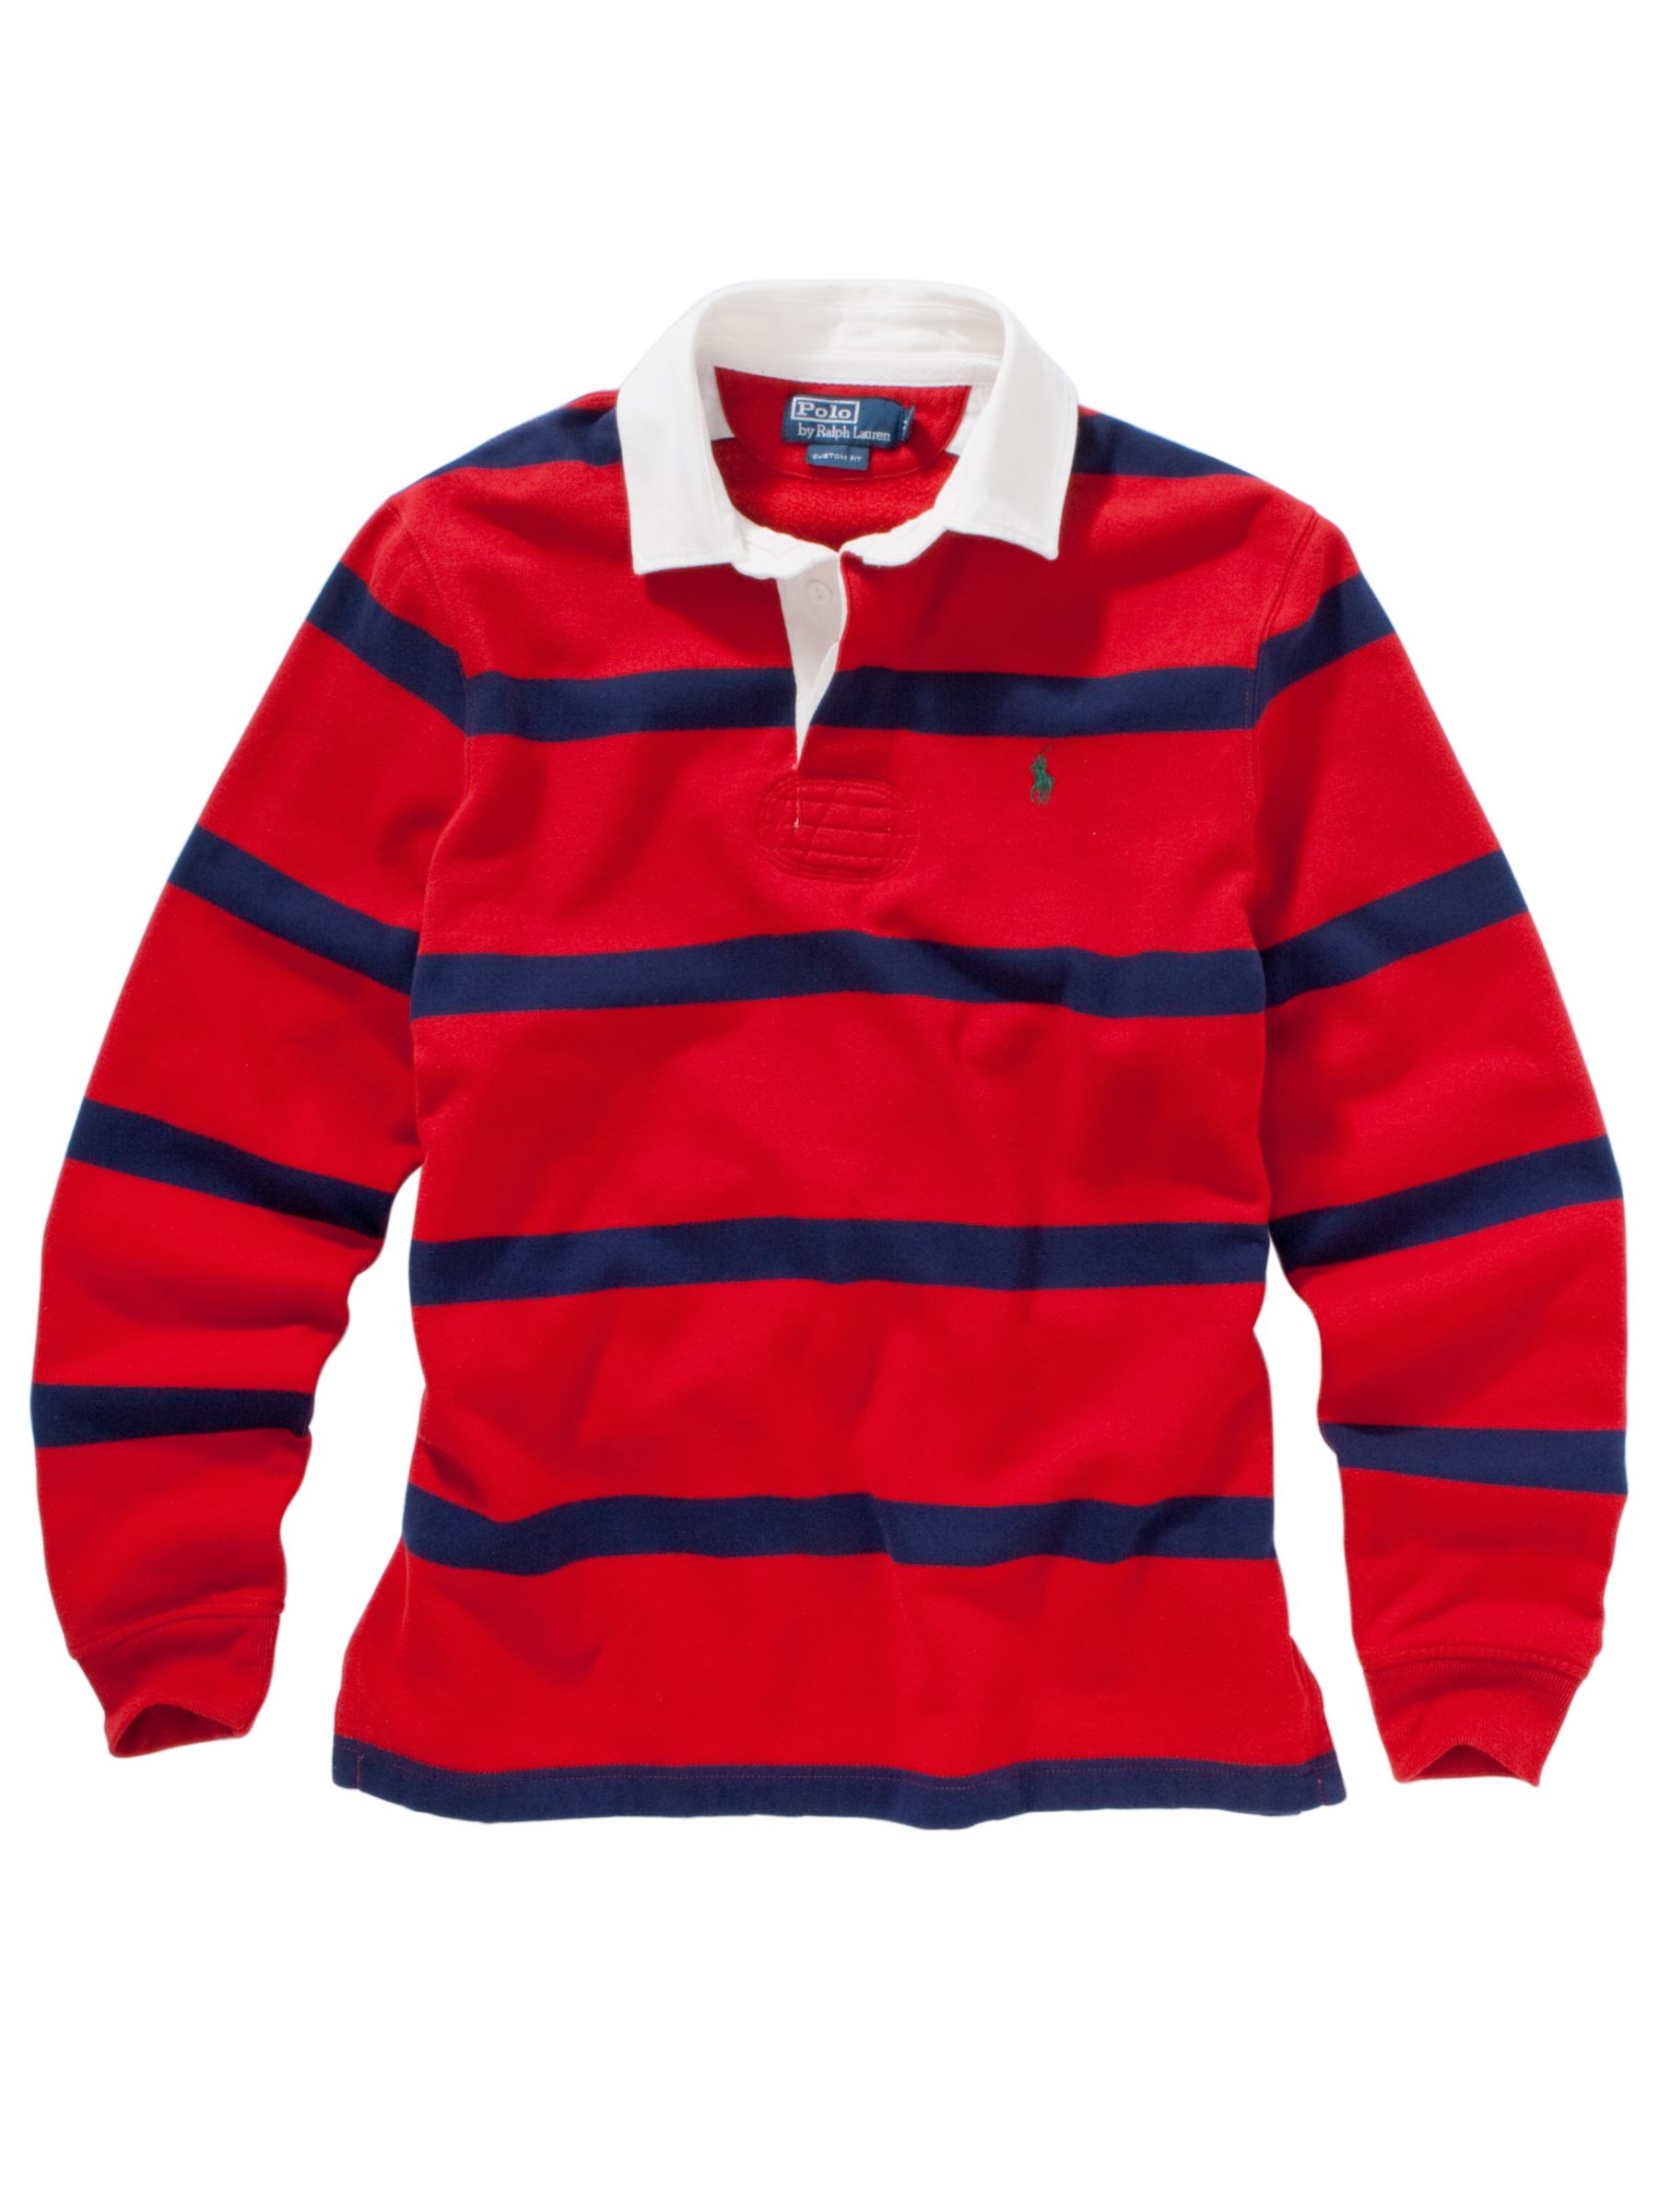 Polo Ralph Lauren Stripe Rugby Shirt, Red/navy